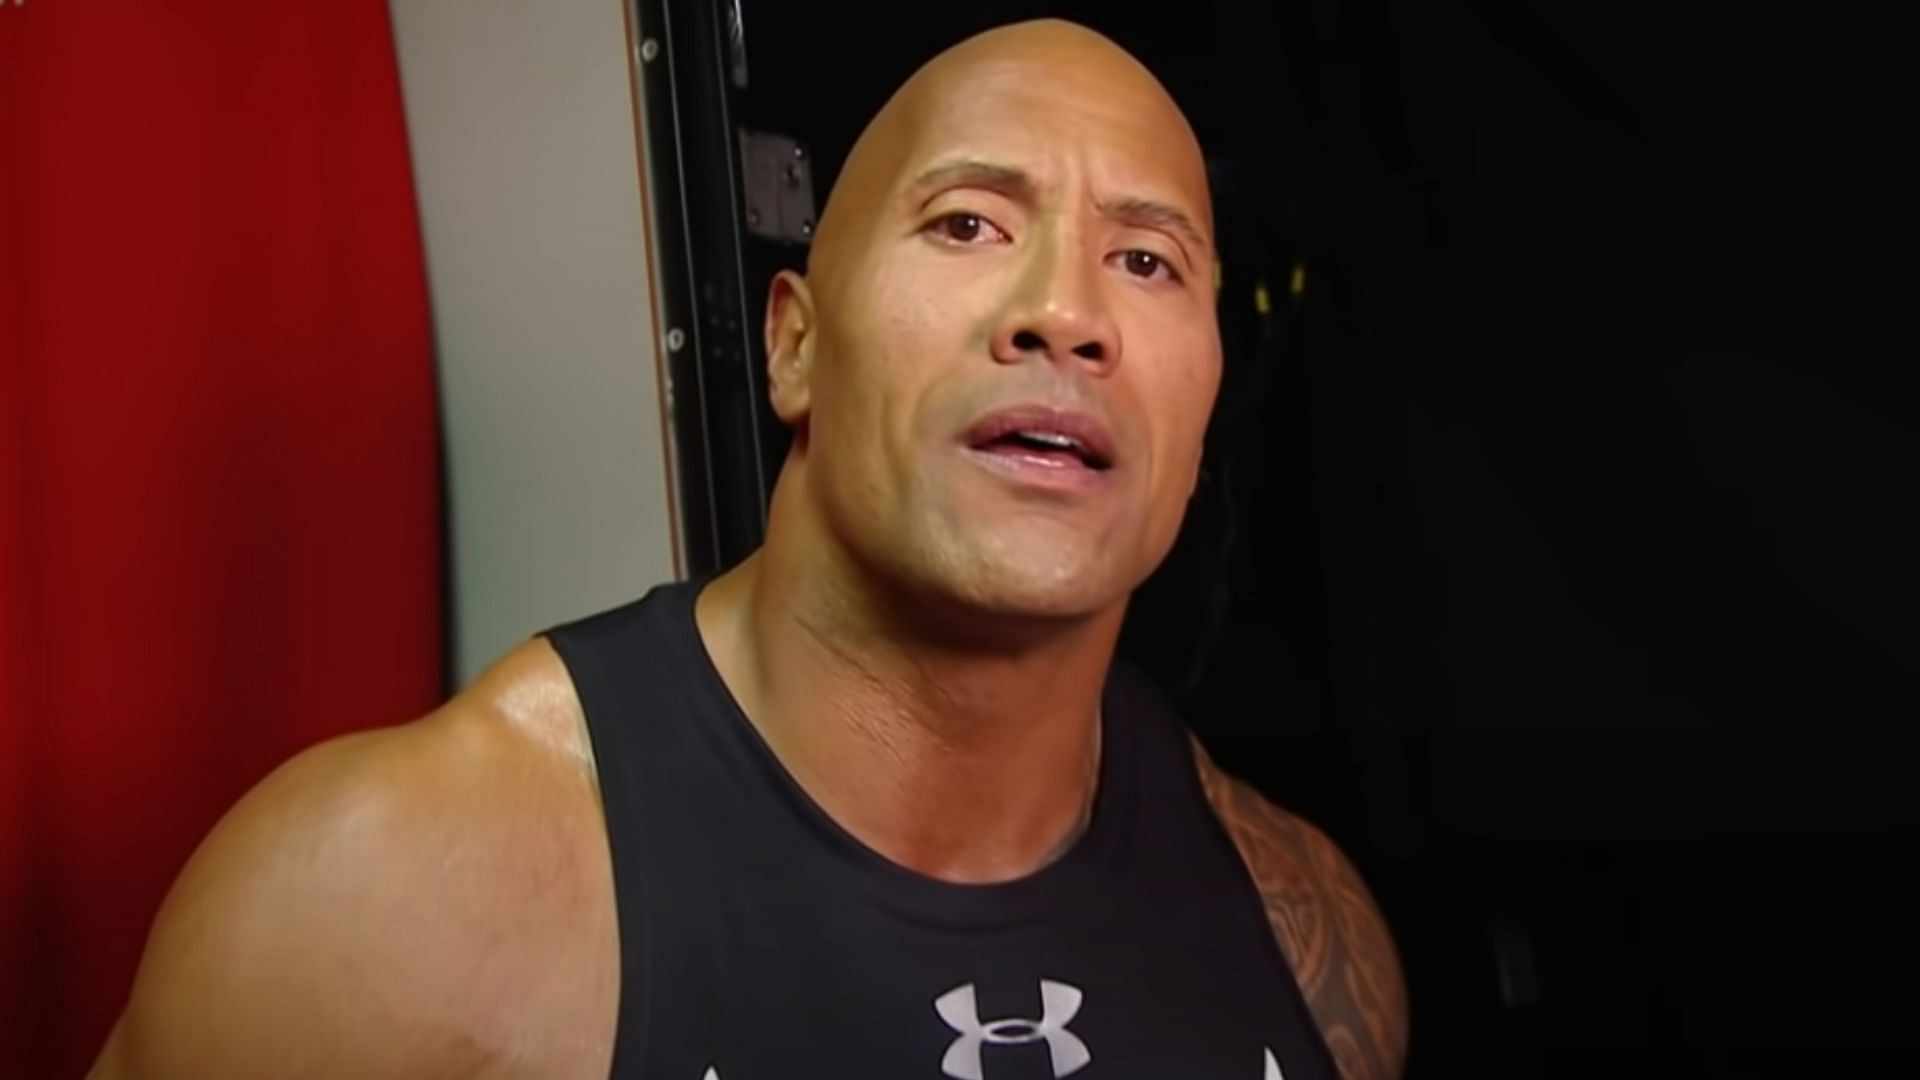 WWE Superstar-turned-Hollywood movie star The Rock